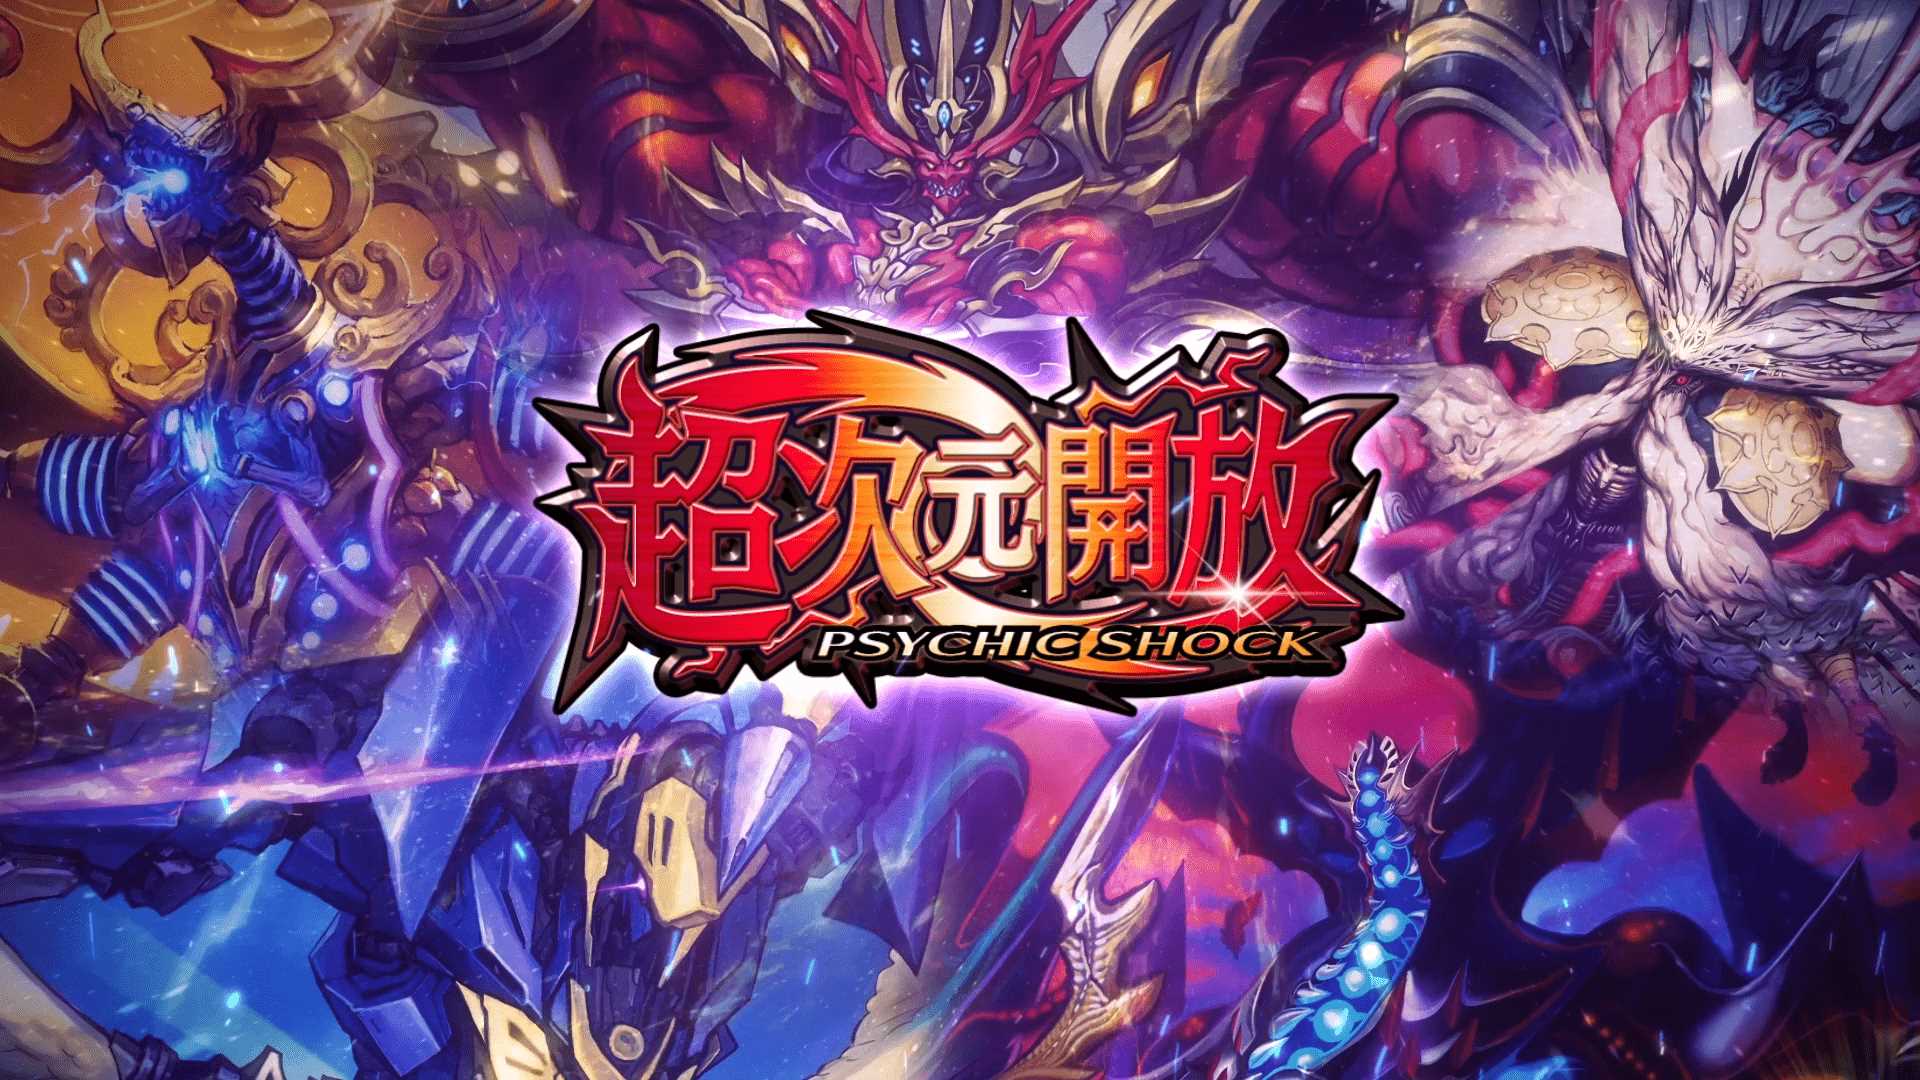 Duel Masters Play S 第13弾カードパック 超次元開放 の配信決定 ティザームービーも公開